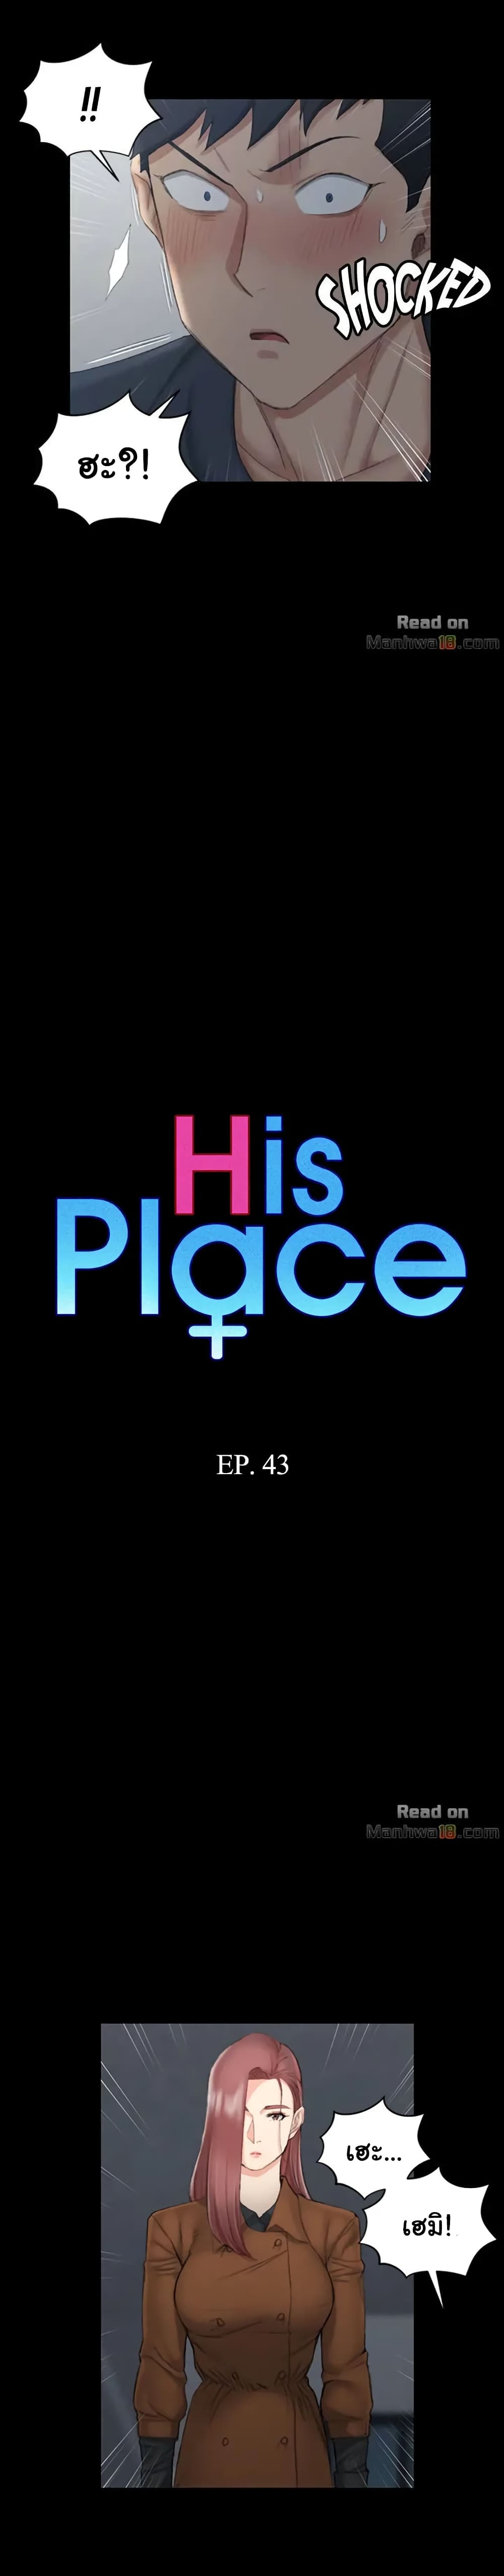 His Place 43 (2)